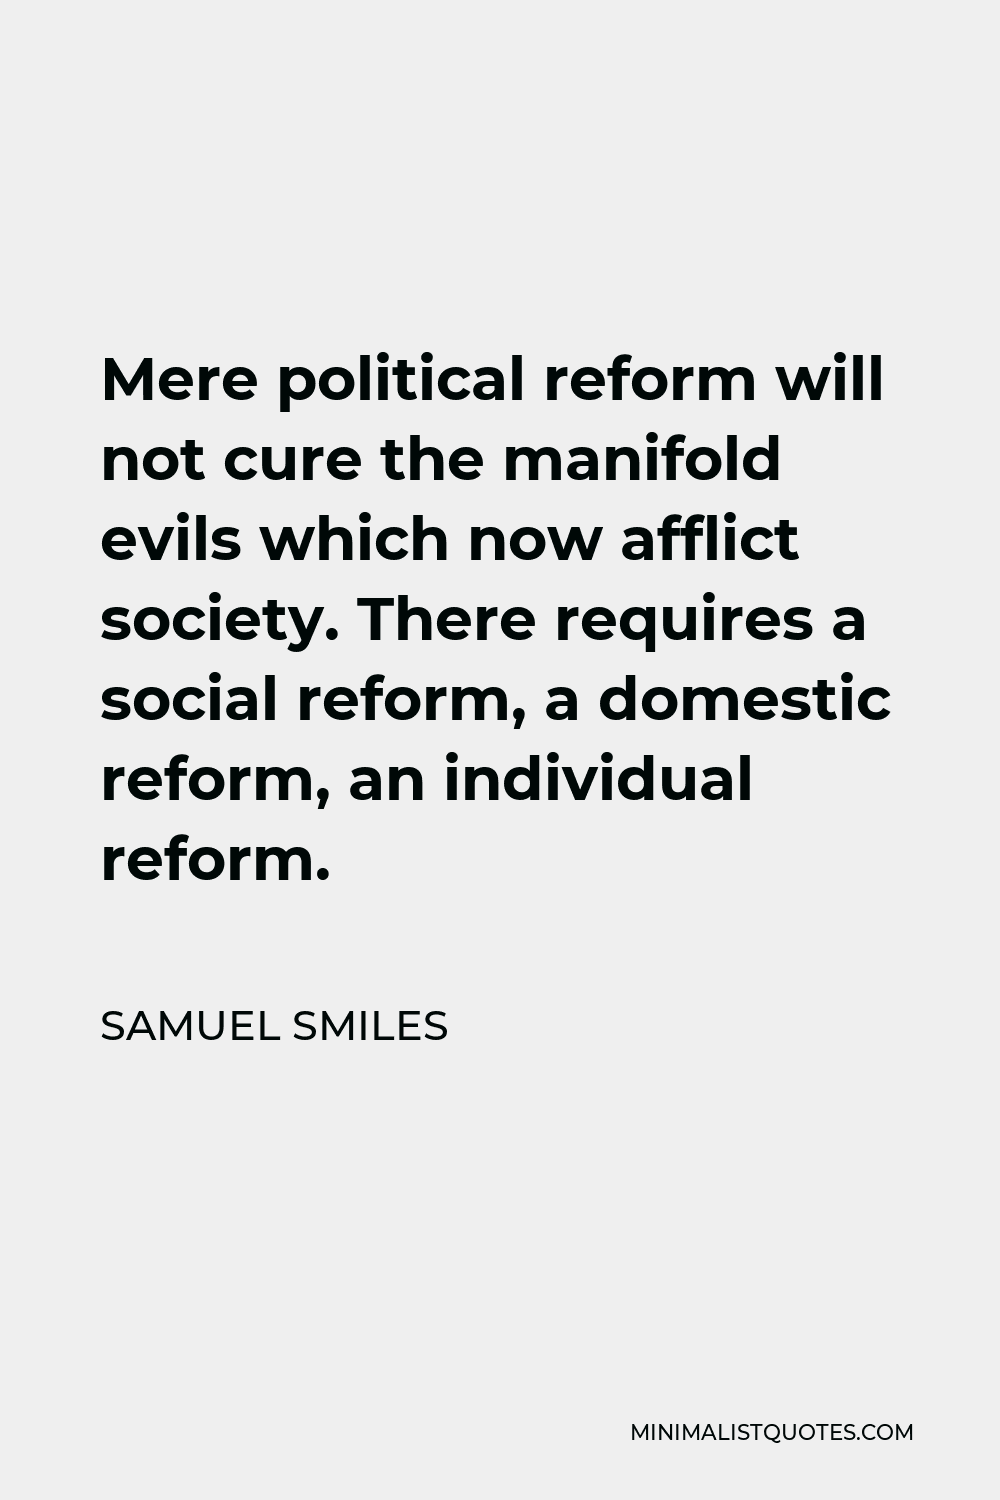 Samuel Smiles Quote - Mere political reform will not cure the manifold evils which now afflict society. There requires a social reform, a domestic reform, an individual reform.